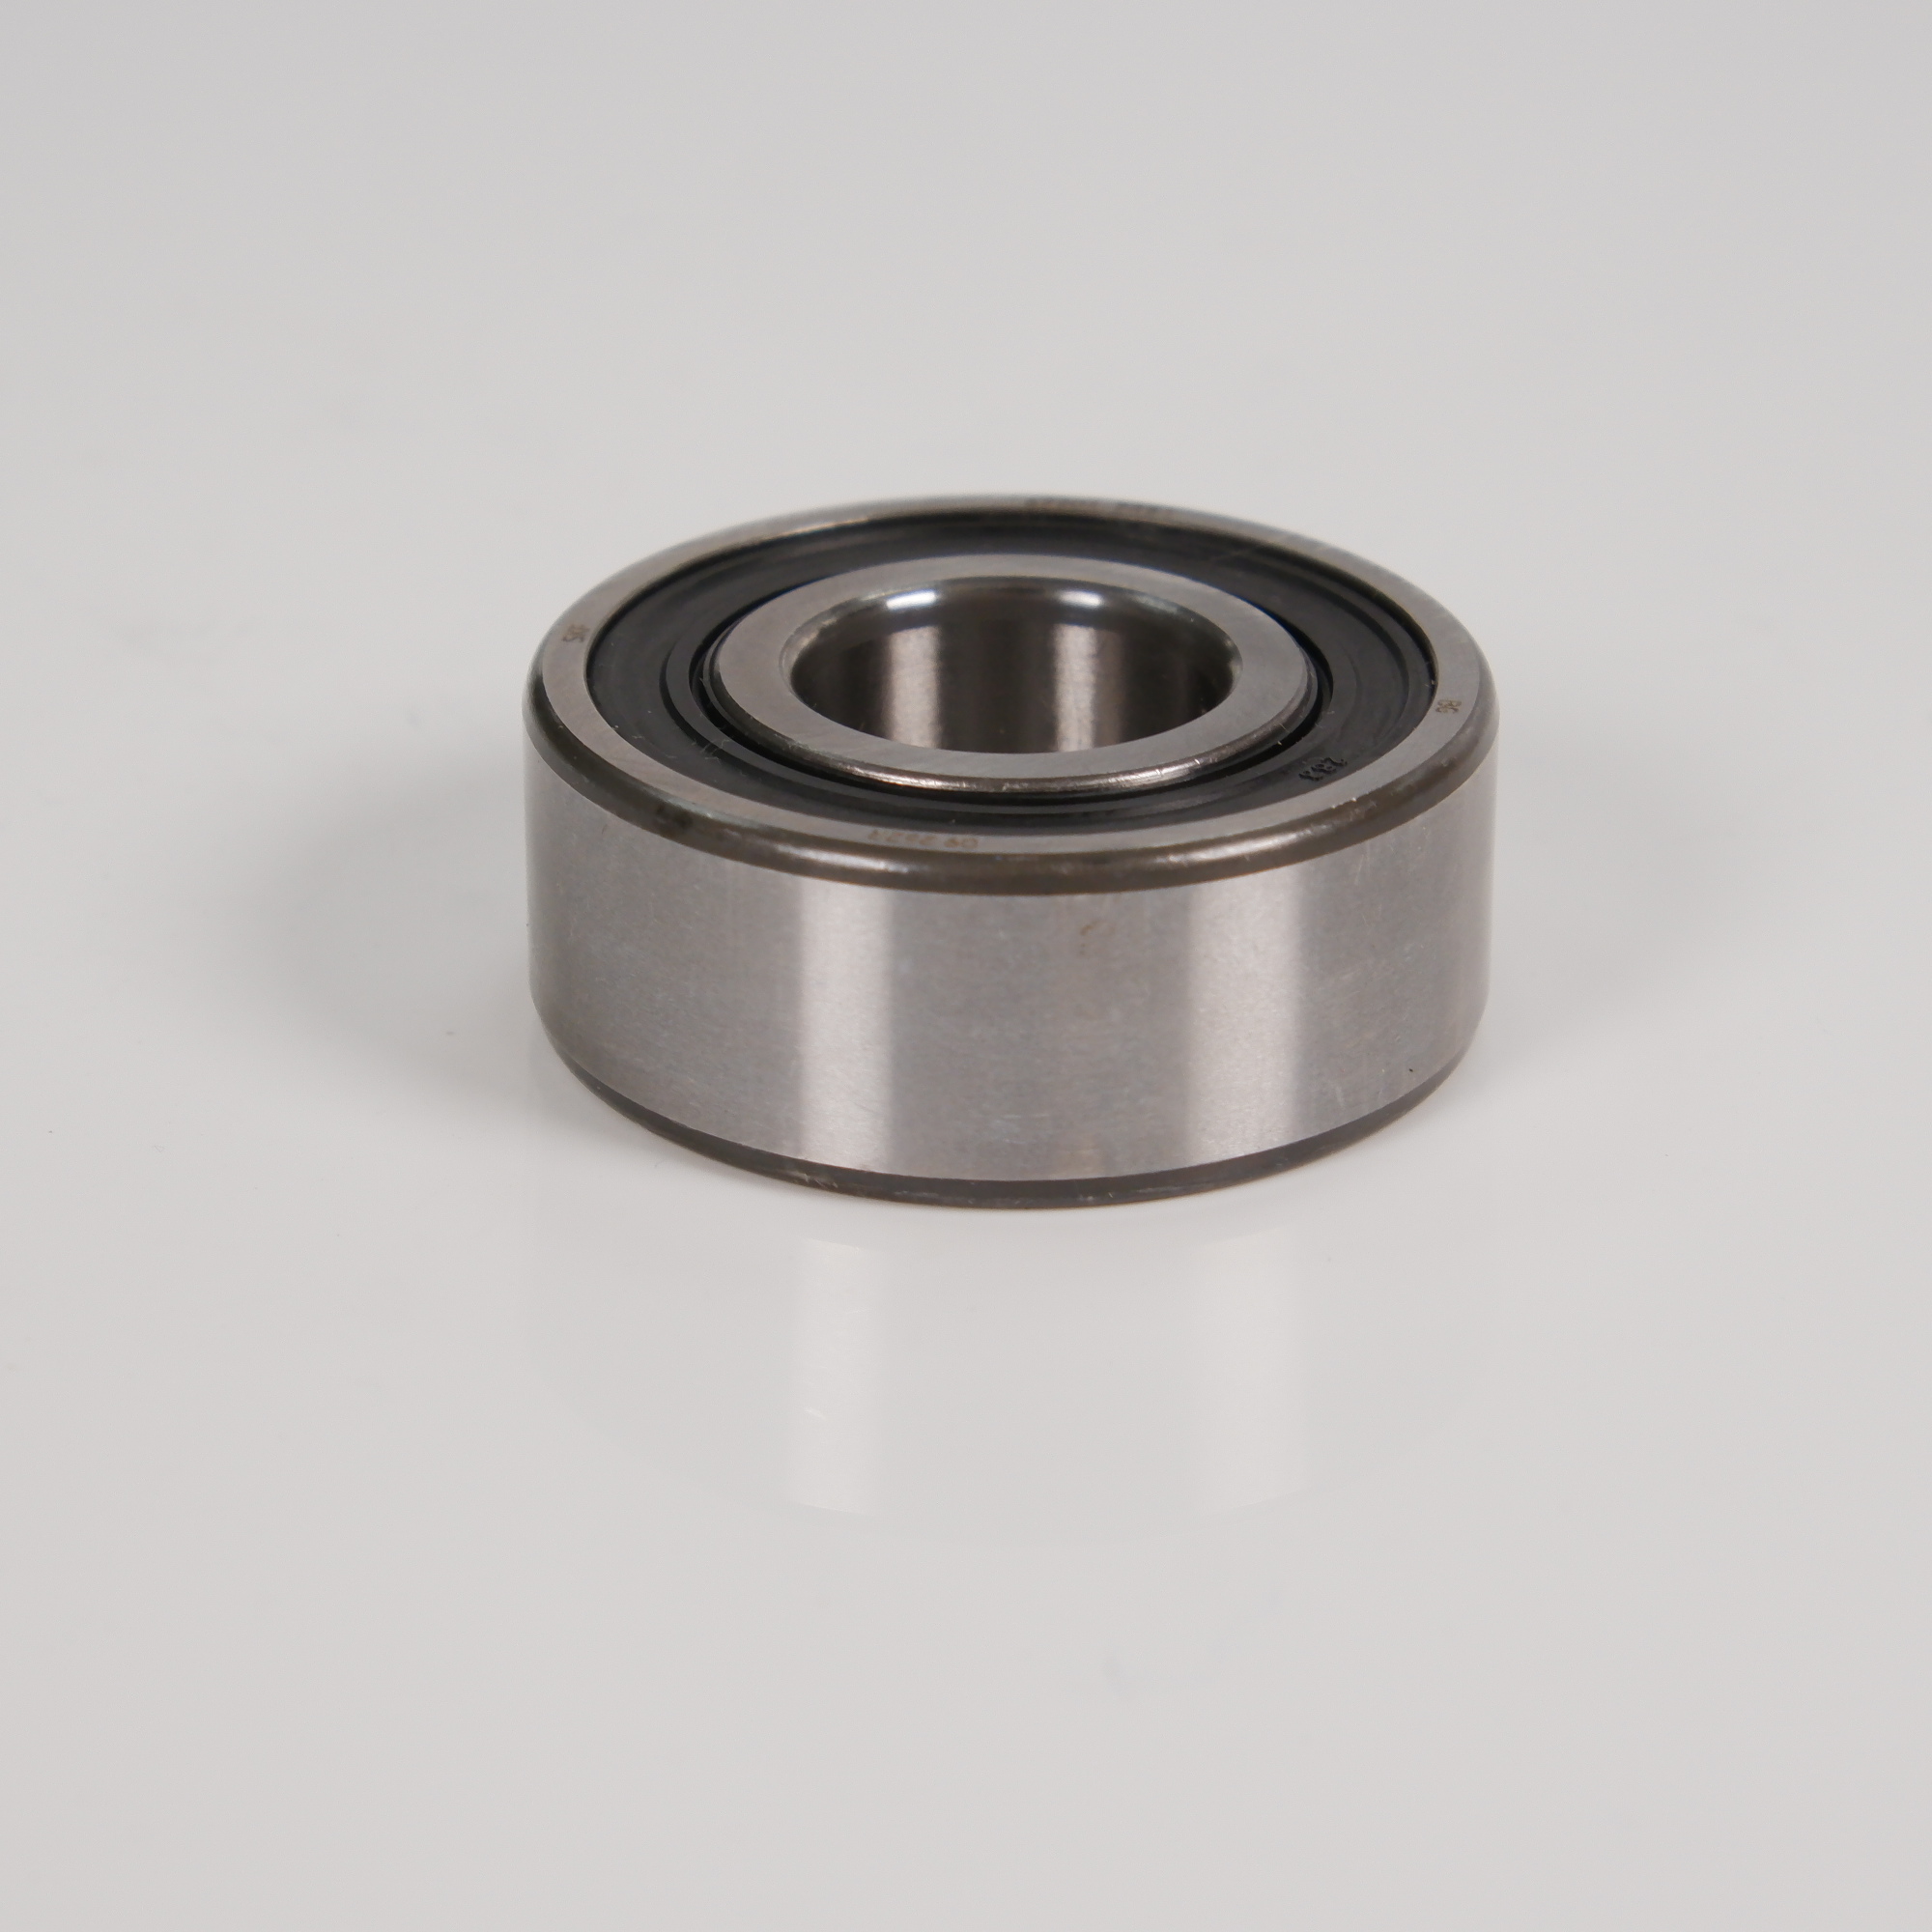  SKF 62204-2RS1